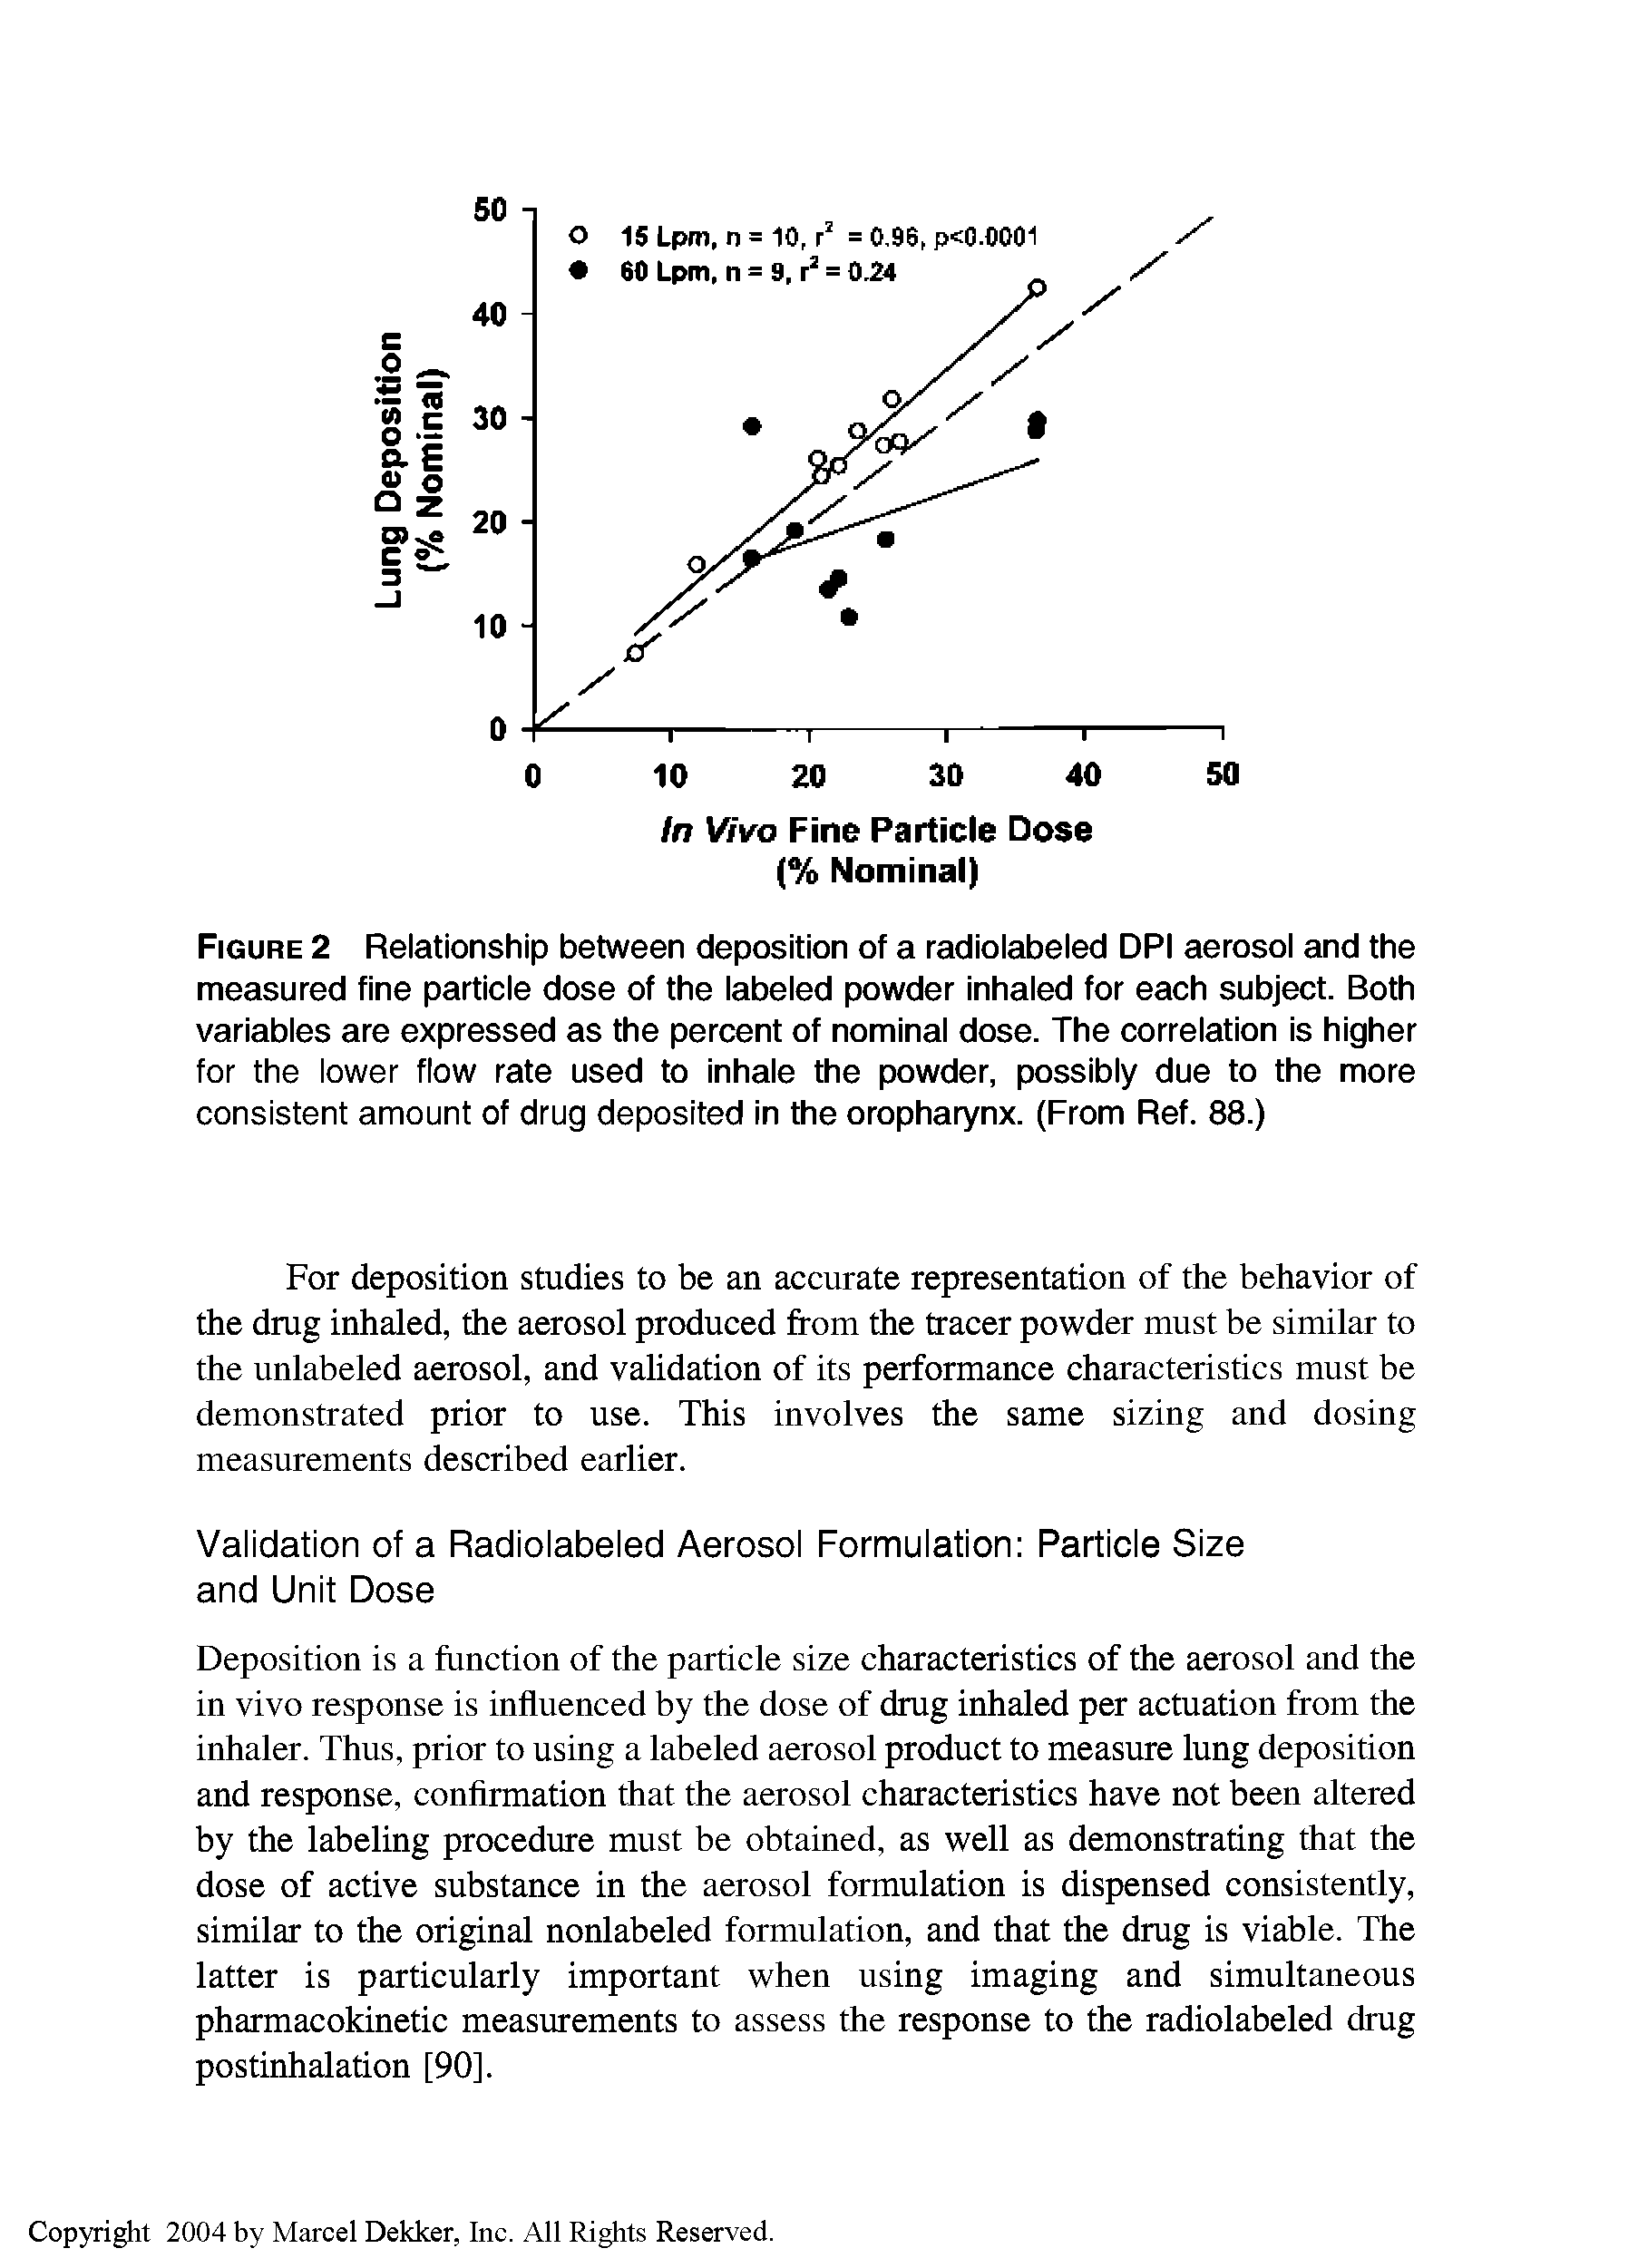 Figure 2 Relationship between deposition of a radiolabeled DPI aerosol and the measured fine particle dose of the labeled powder inhaled for each subject. Both variables are expressed as the percent of nominal dose. The correlation is higher for the lower flow rate used to inhale the powder, possibly due to the more consistent amount of drug deposited in the oropharynx. (From Ref. 88.)...